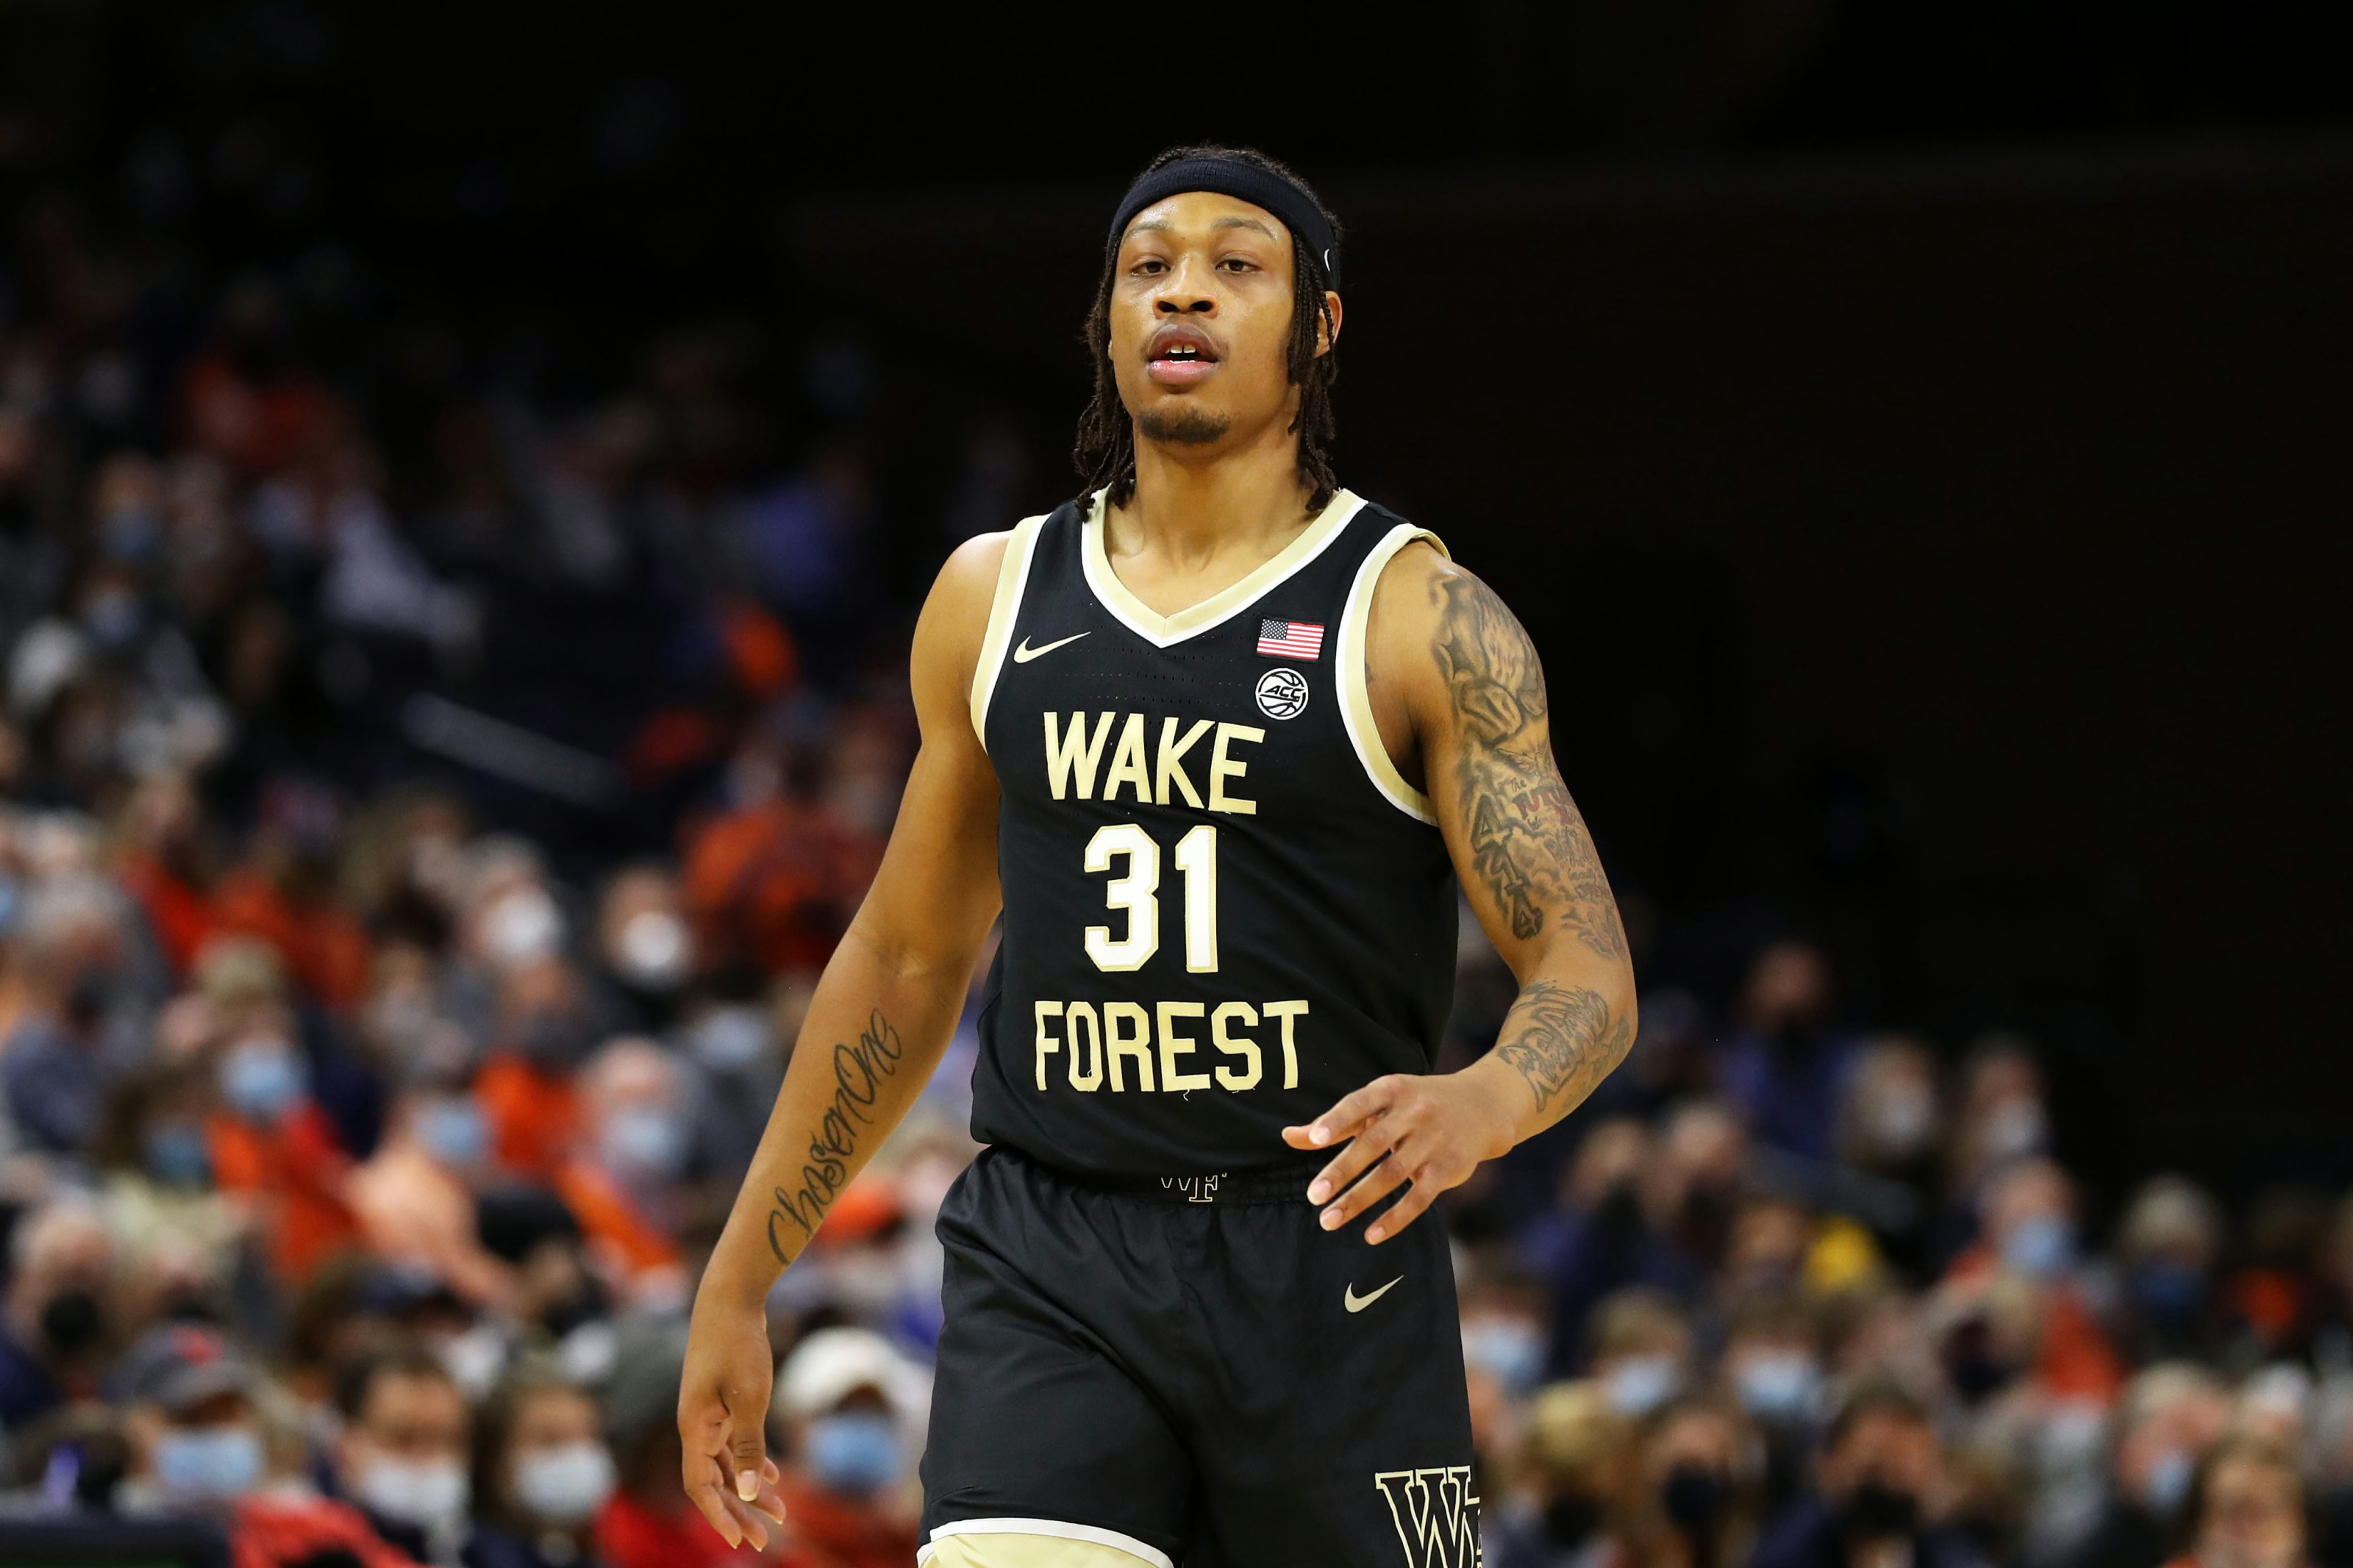 ACC Basketball 10 biggest storylines to watch for 2022-23 season